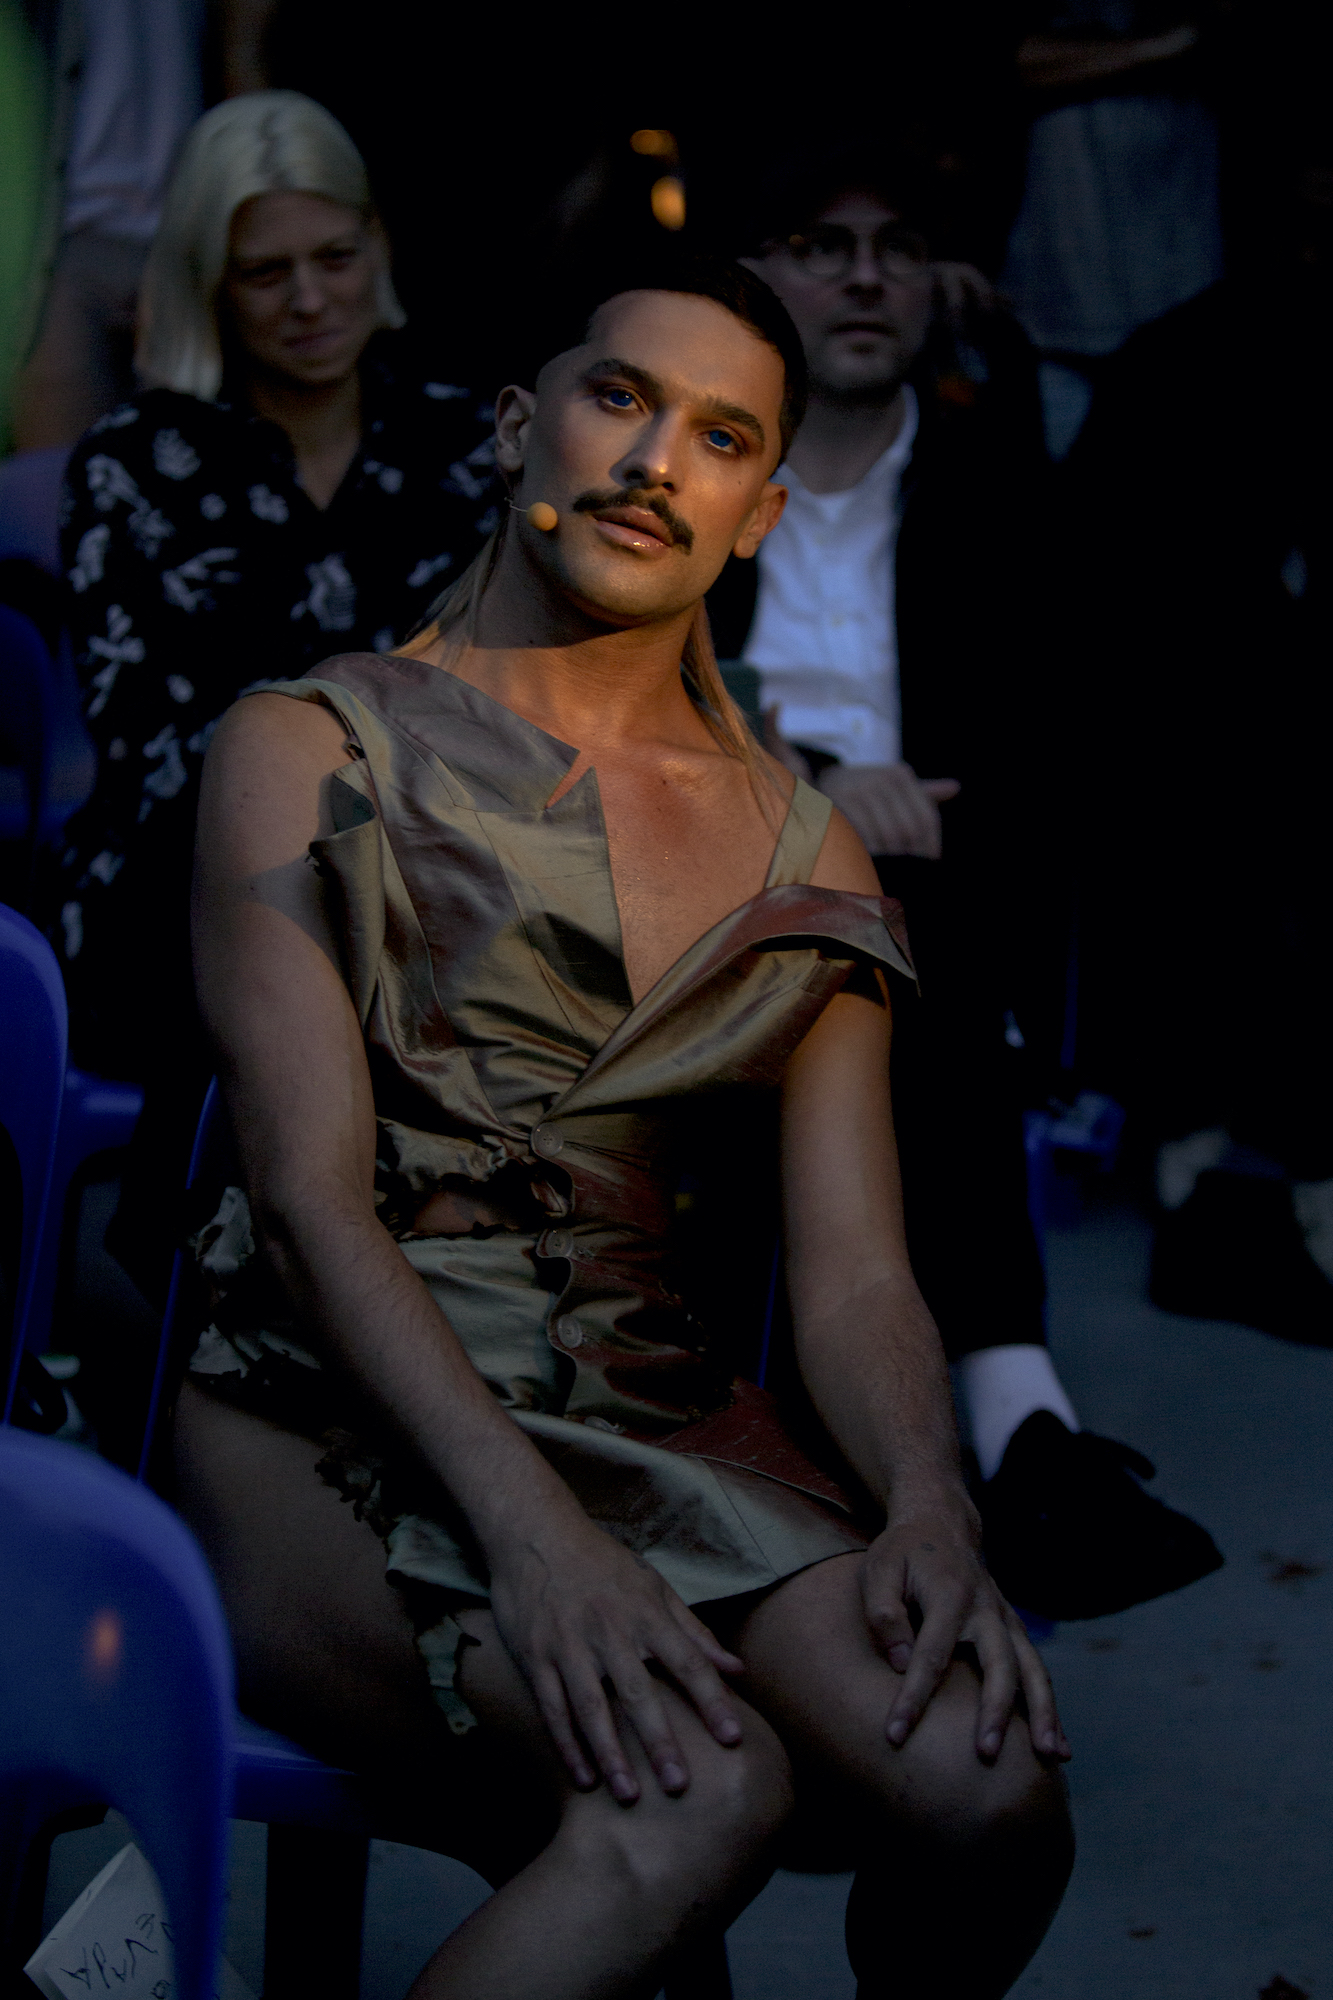 a masculine person with a mustache wears a shiny garment and sits